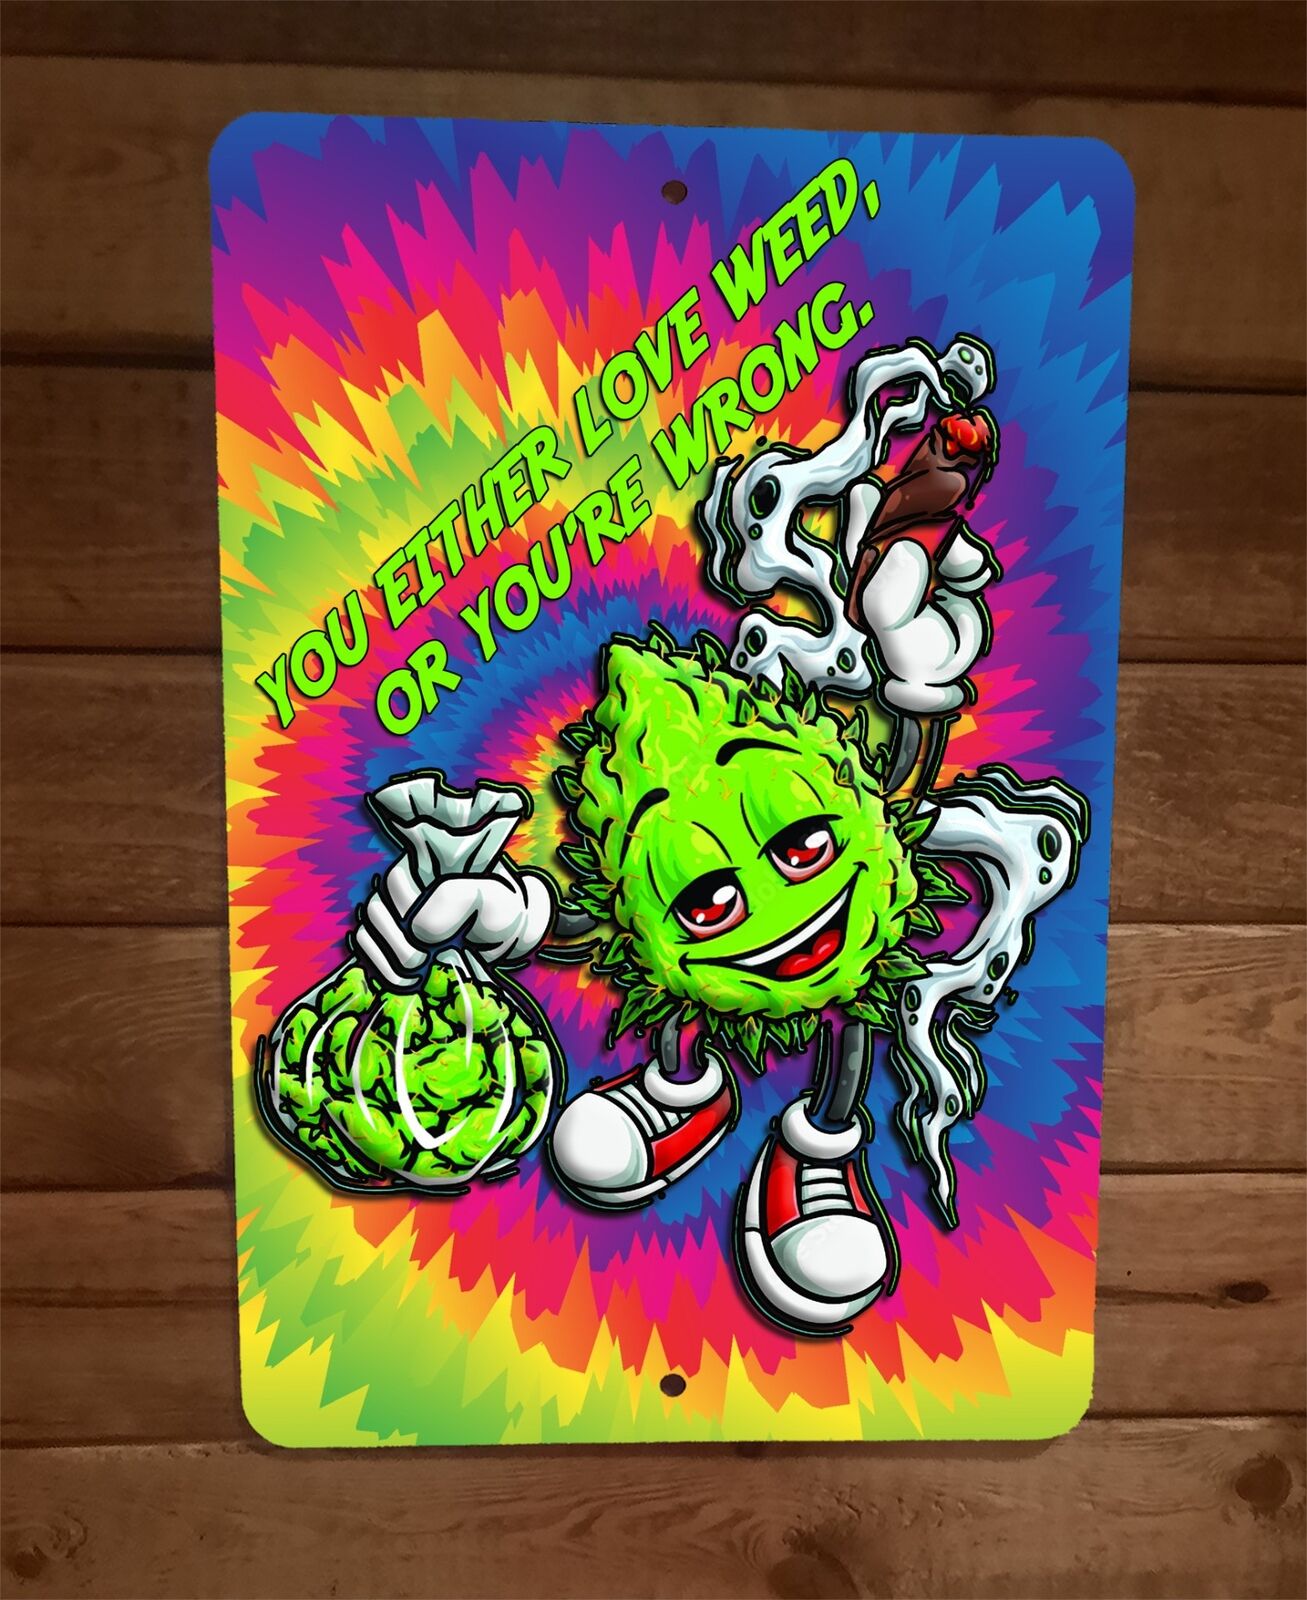 You Either Love Weed or You're Wrong 8x12 Metal Wall Sign